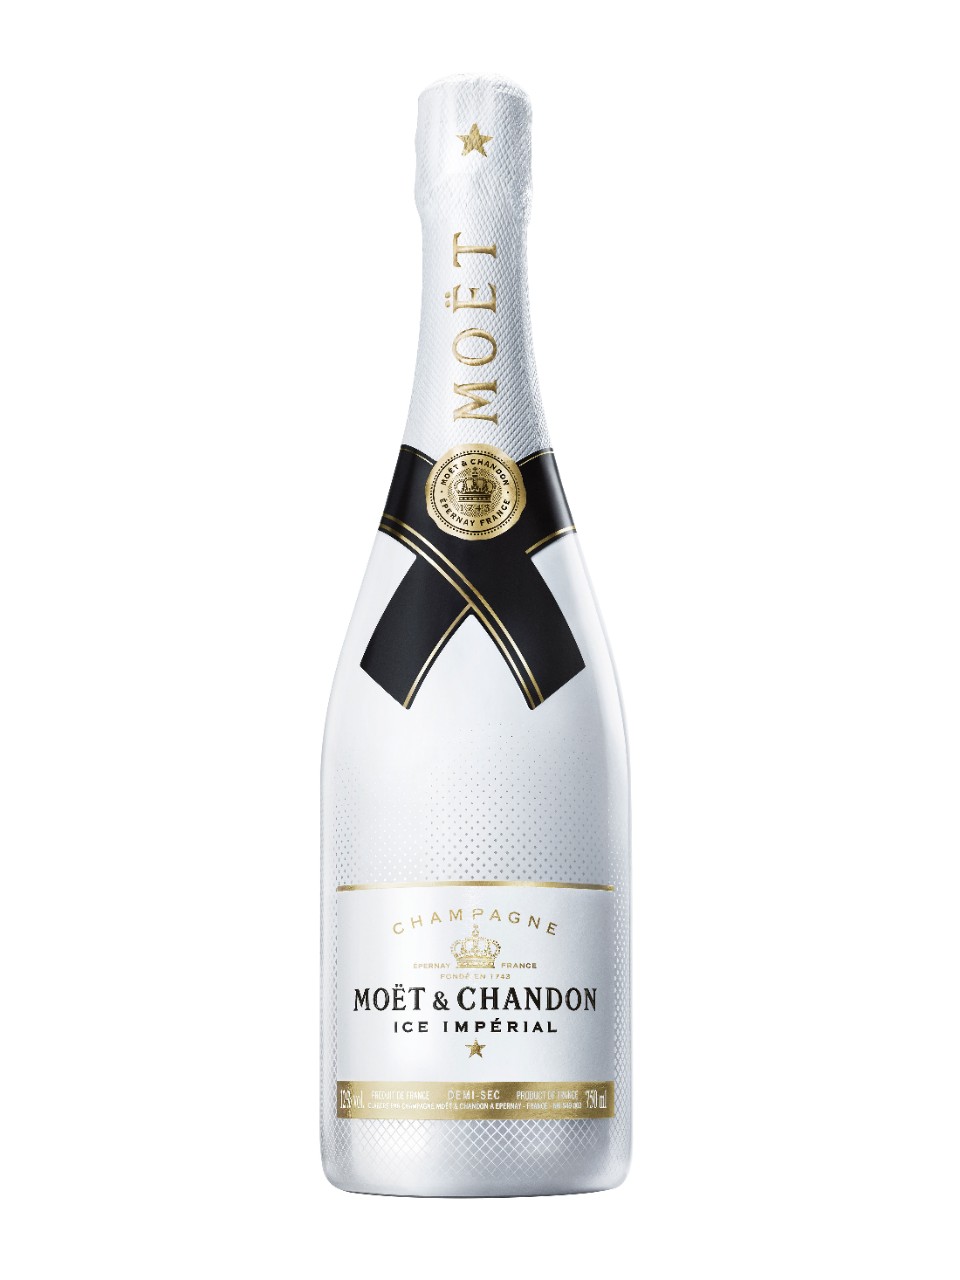 Moet-_-Chandon-Ice-Imperial-Champagne